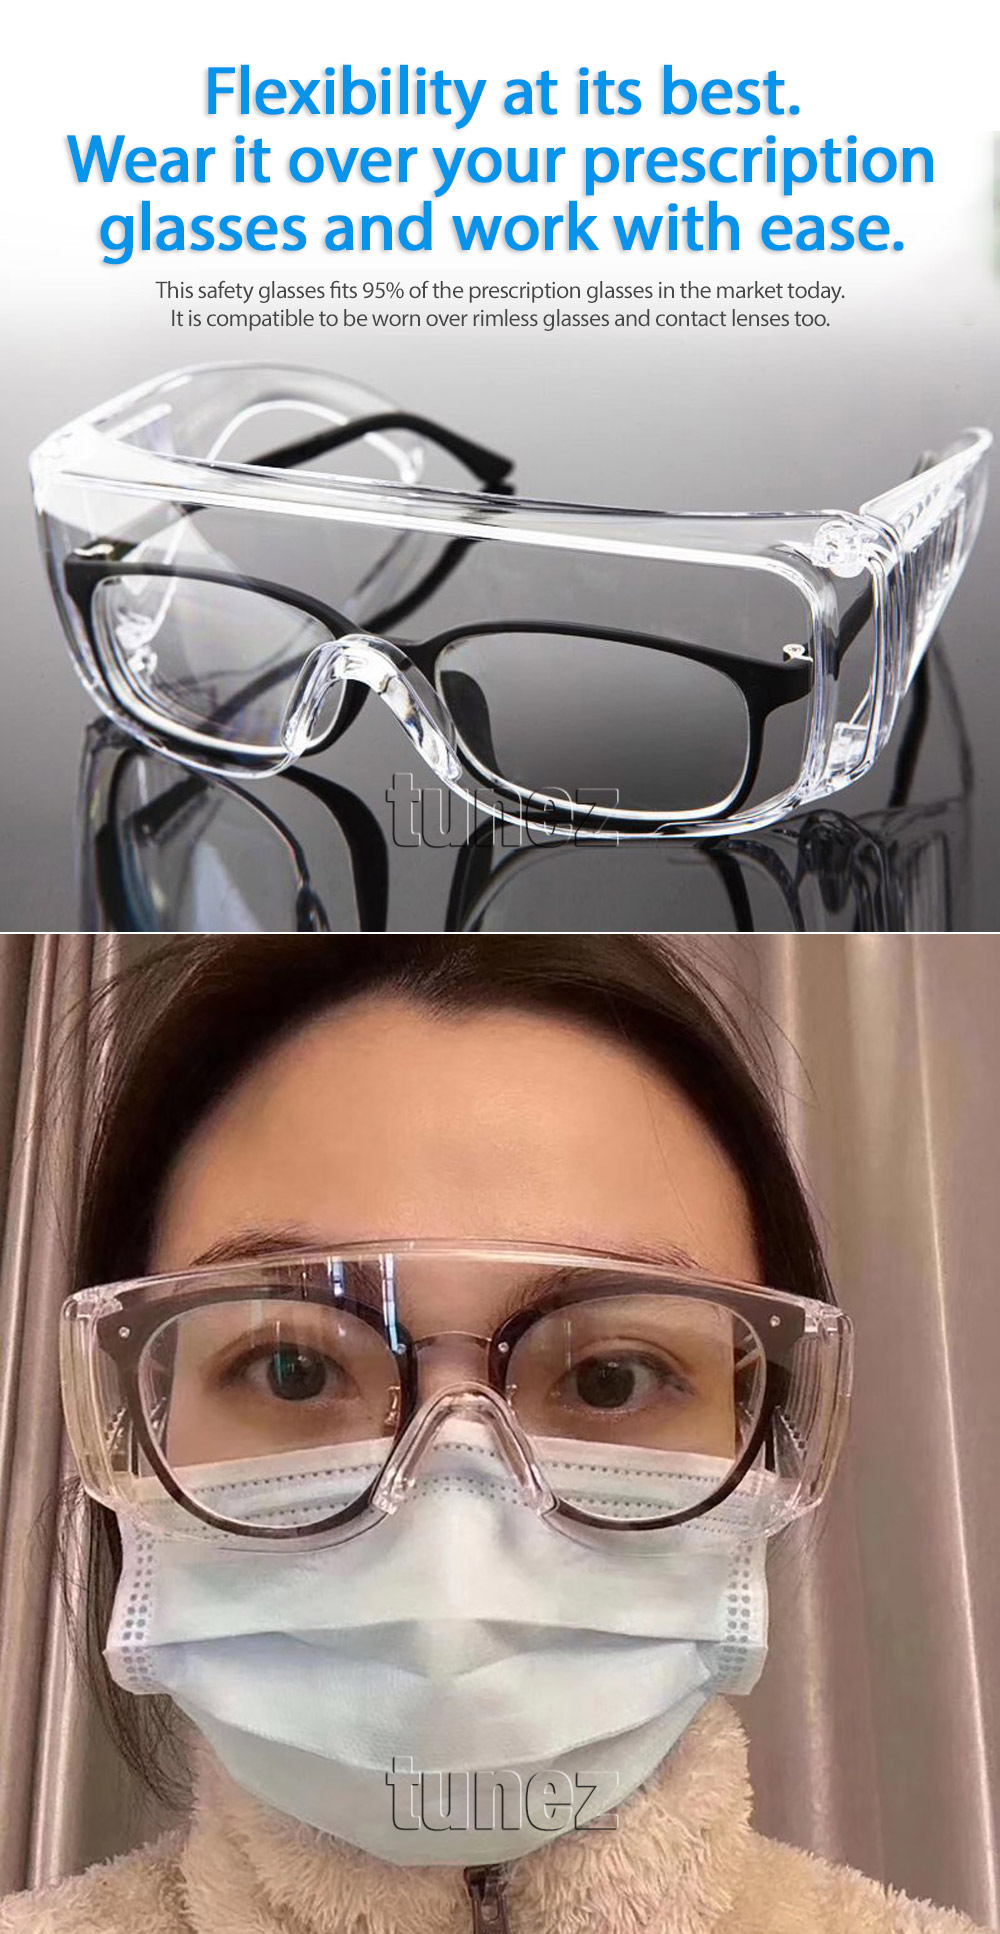 GG01 Surgical Medical Procedure Safety Protection Goggles Glasses Spectacles Eyewear Face Protective Hygiene Hygienically Shield Prevent Splashes Respiratory Droplets Pathogen Dustproof Light Weight Transparent Clear White Bacteria Guard Comfortable Prescription Glasses